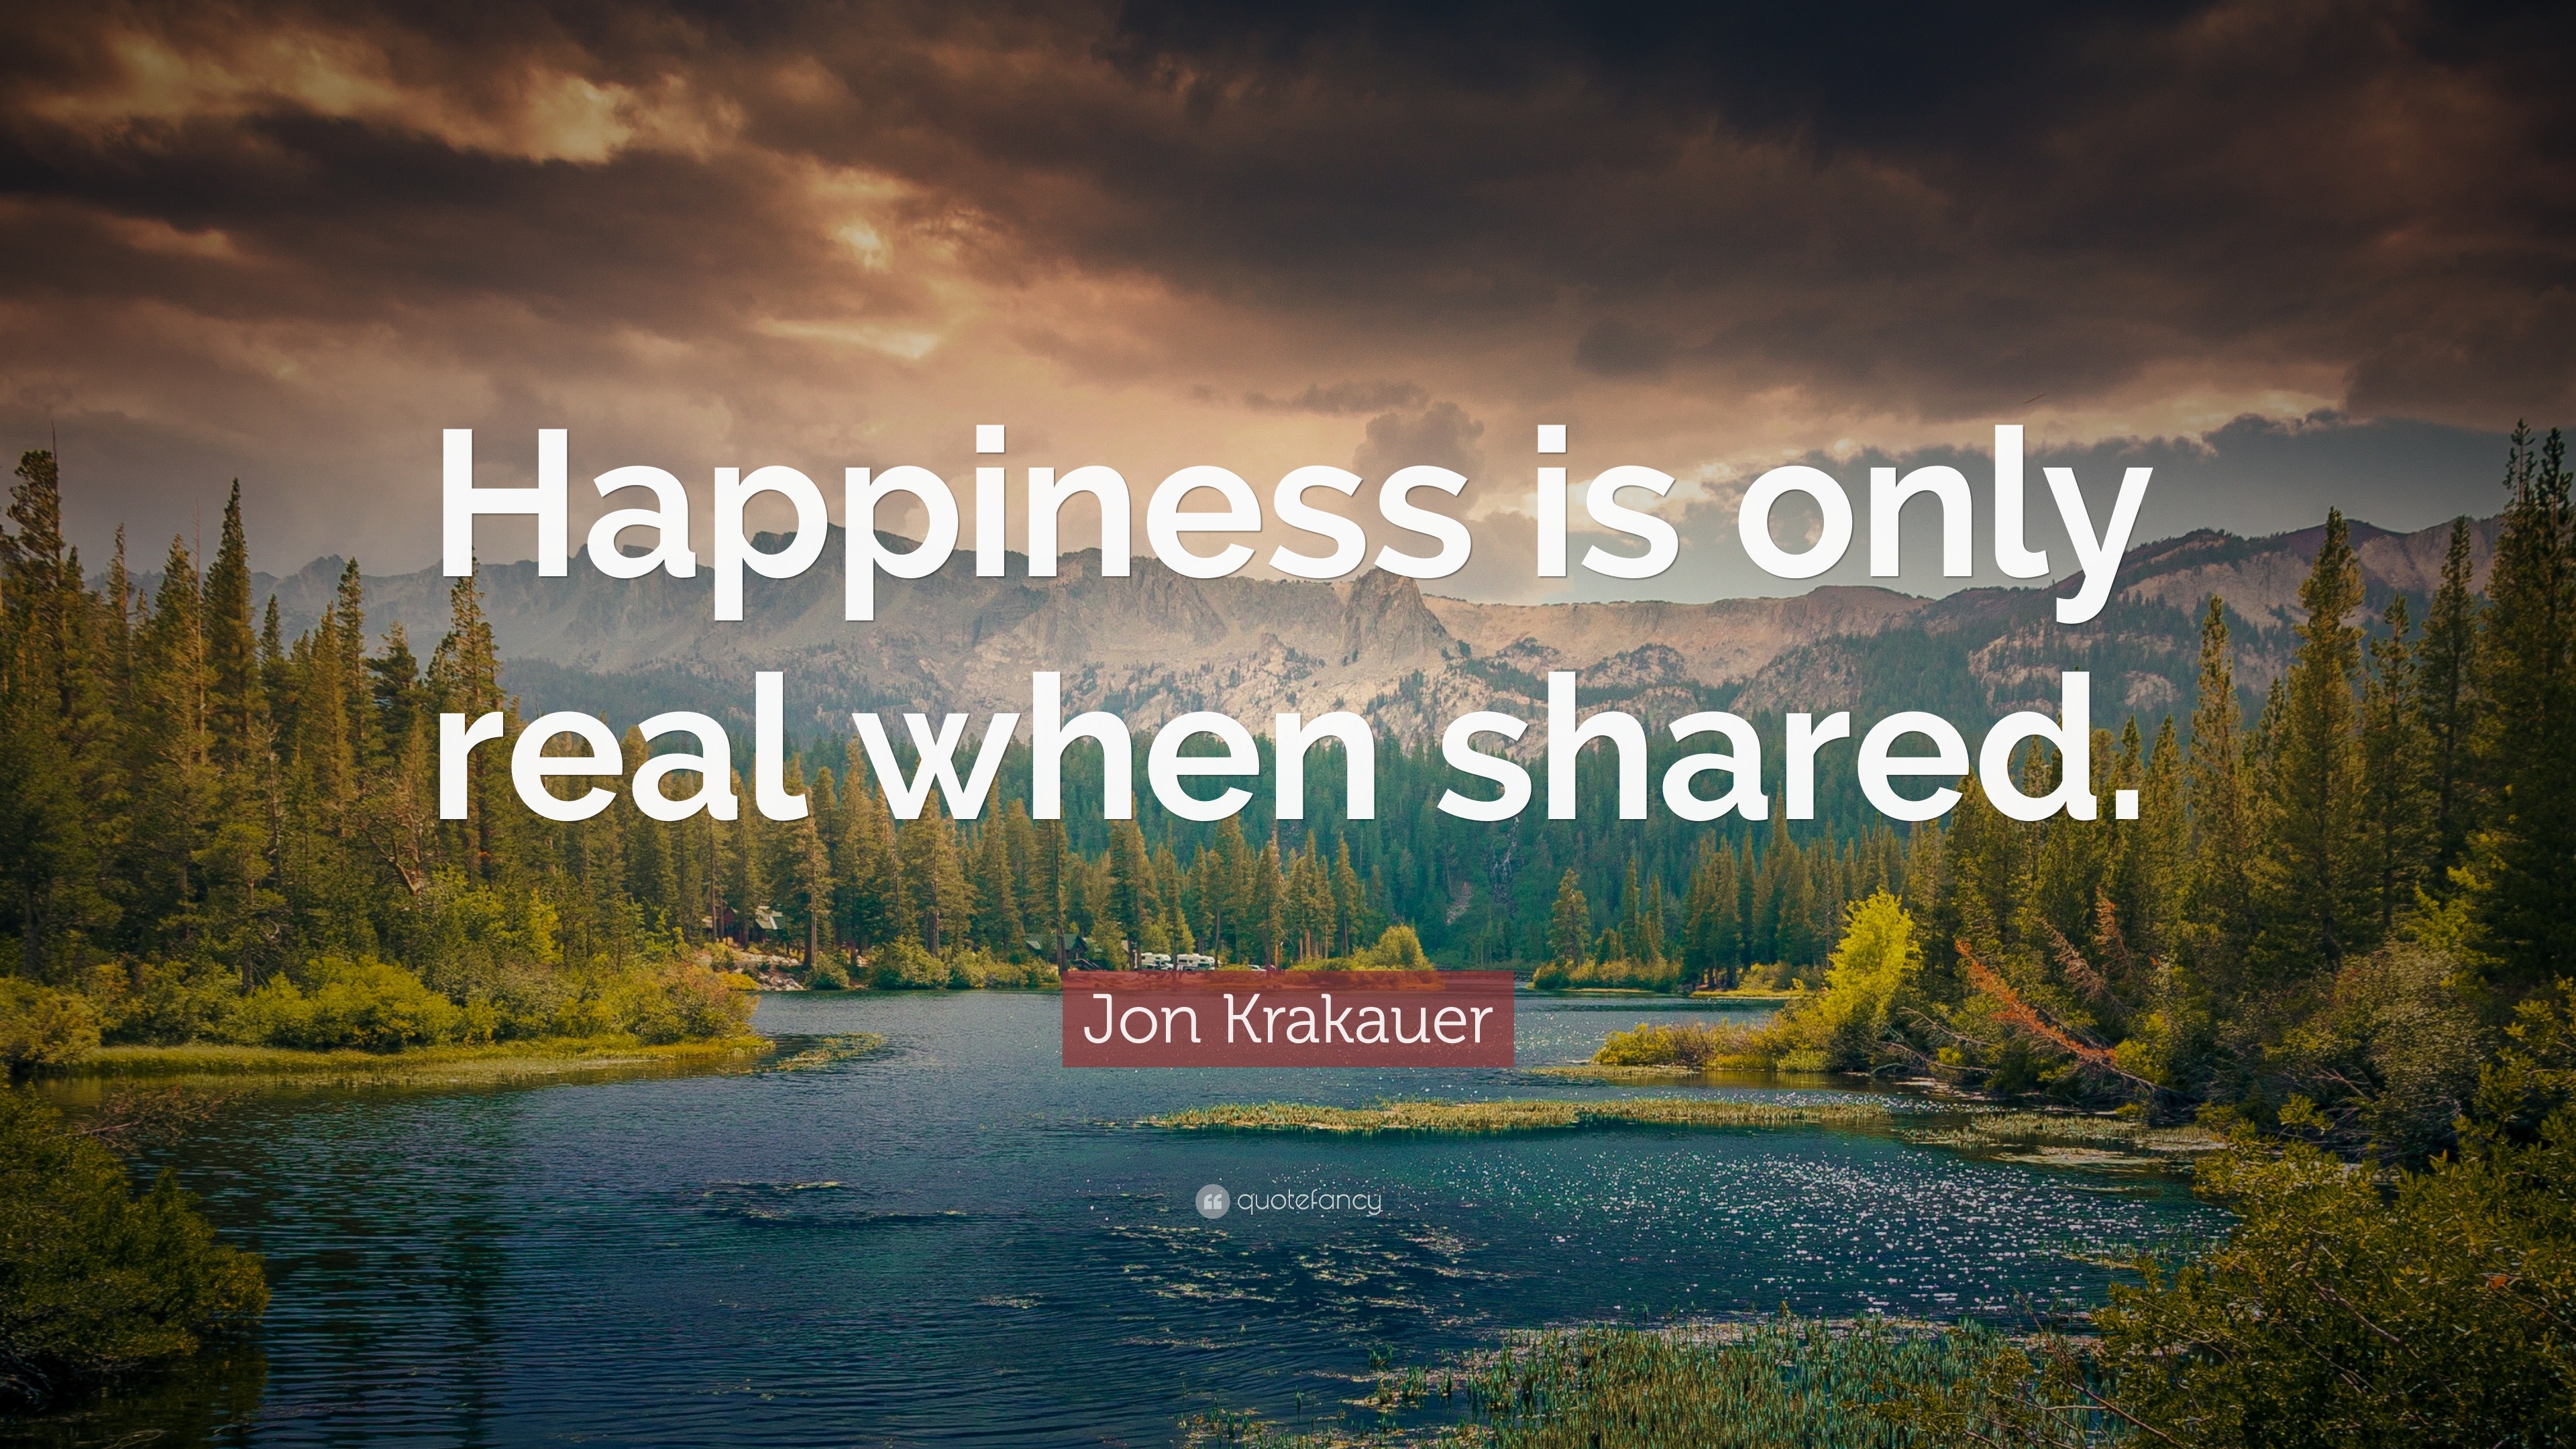 Jon Krakauer Quote: "Happiness is only real when shared ...